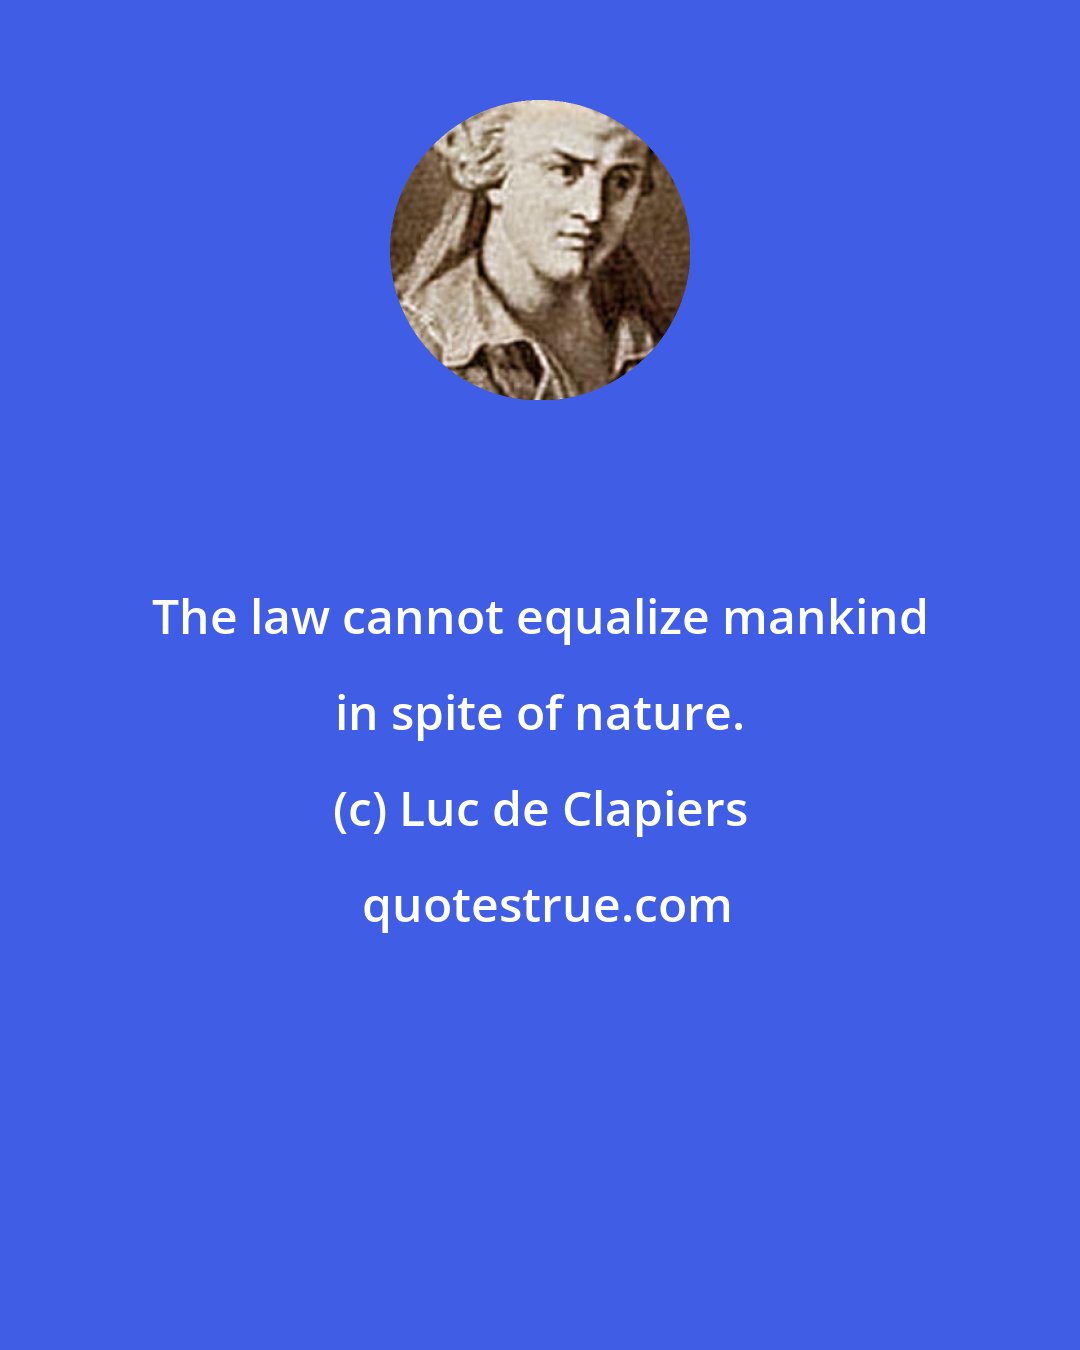 Luc de Clapiers: The law cannot equalize mankind in spite of nature.